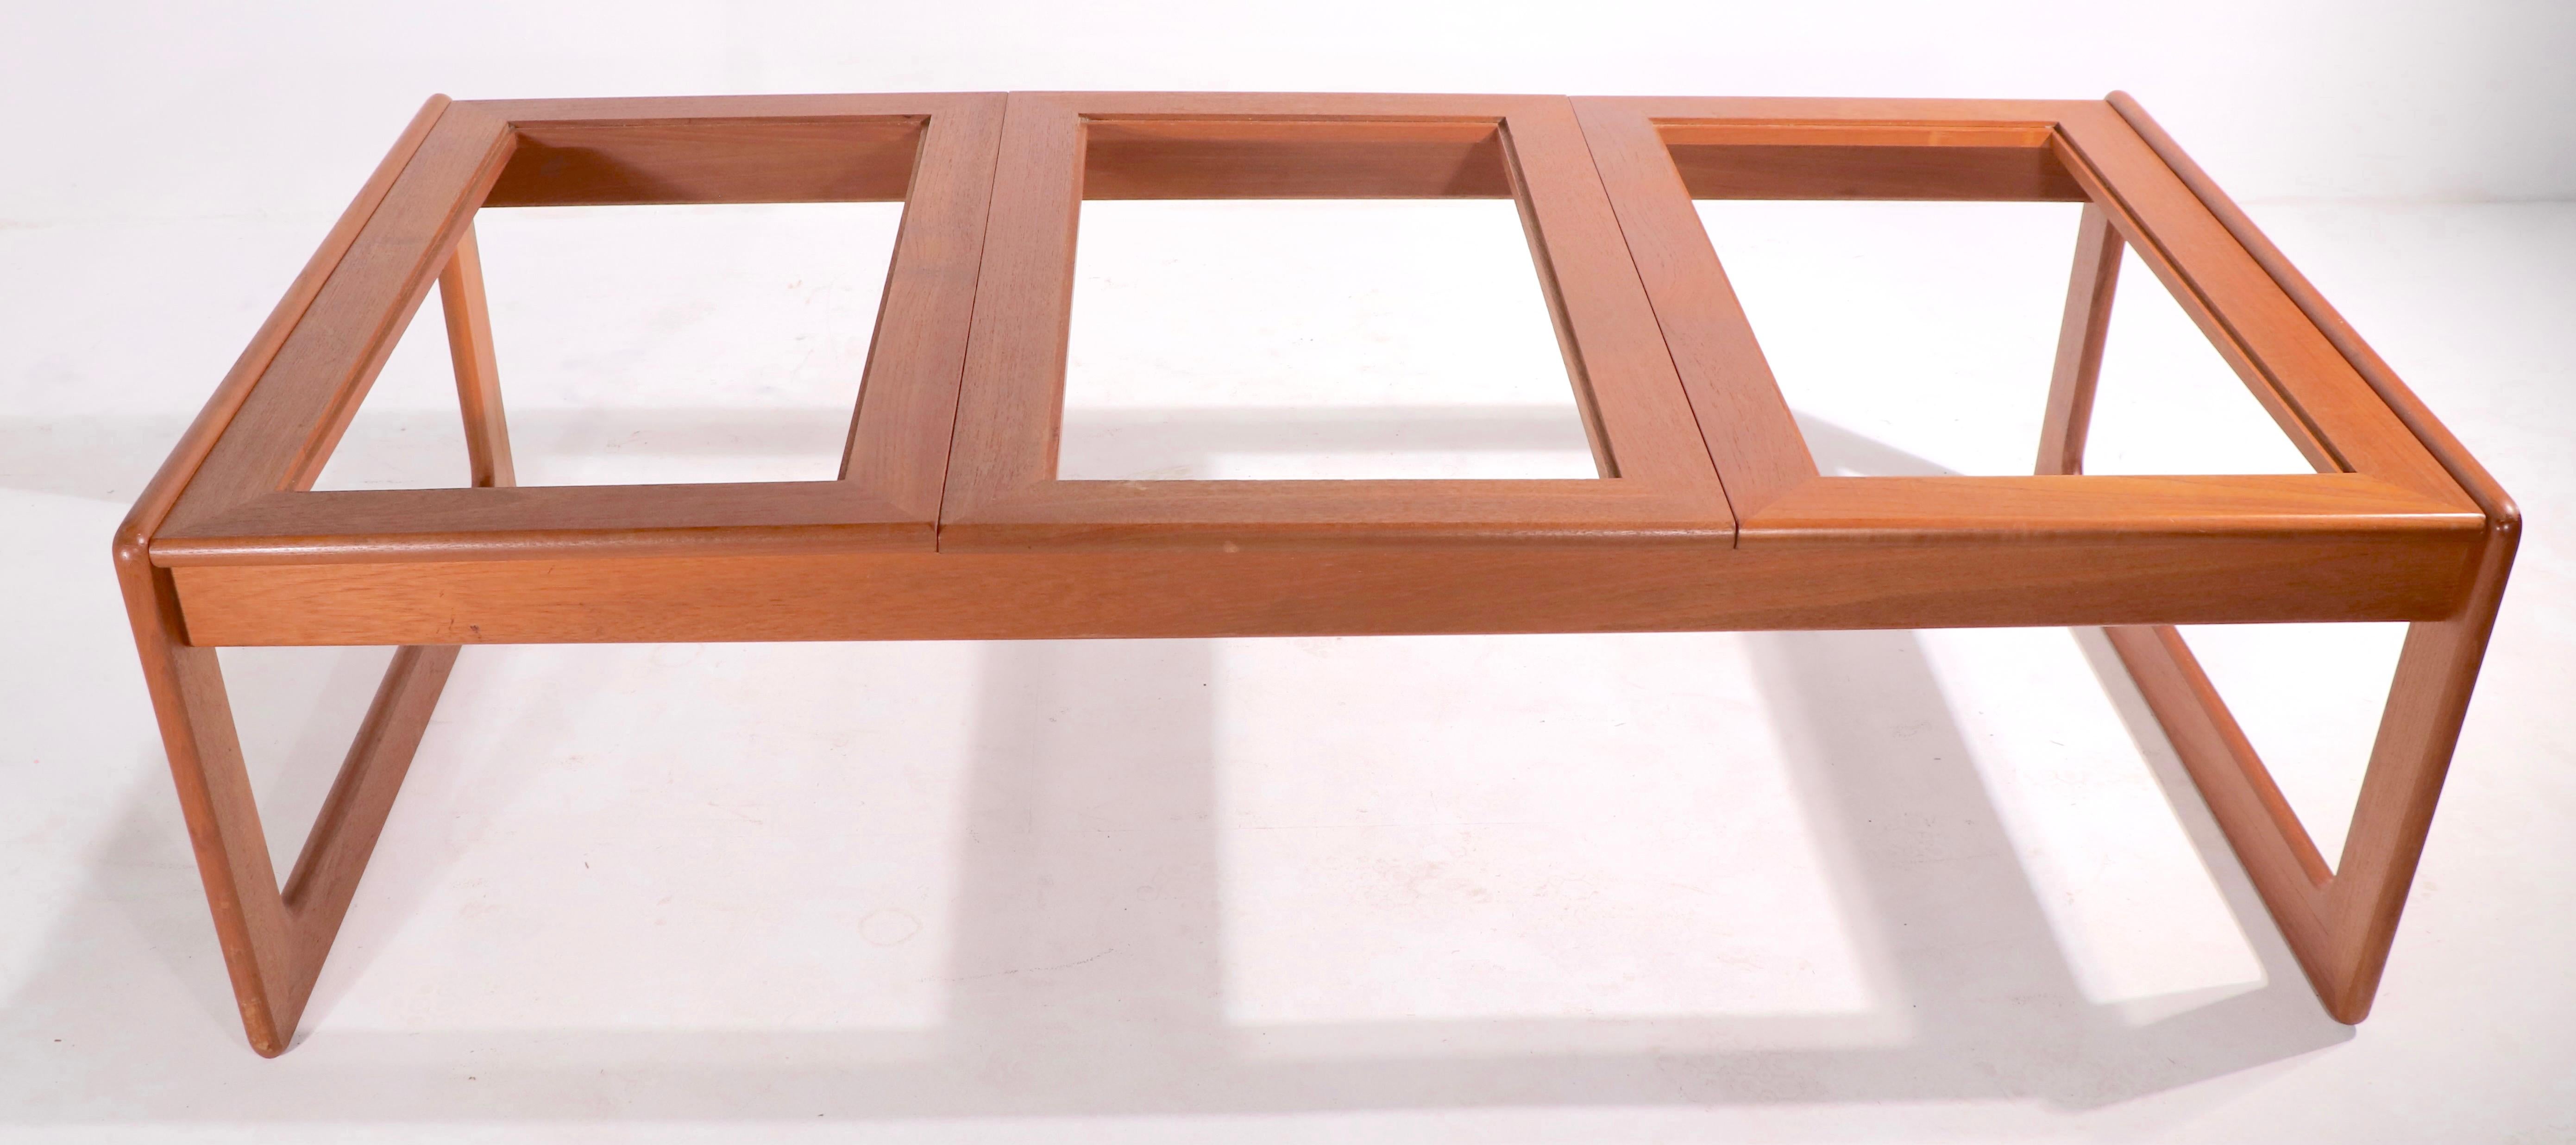 Unusually large grid coffee table made in Denmark by Komfort. This example has a solid teak frame, with three tinted glass panel inserts at the top. Most of the Kormfort grid coffee tables have only two panels, this one has three - panels 24 x 14